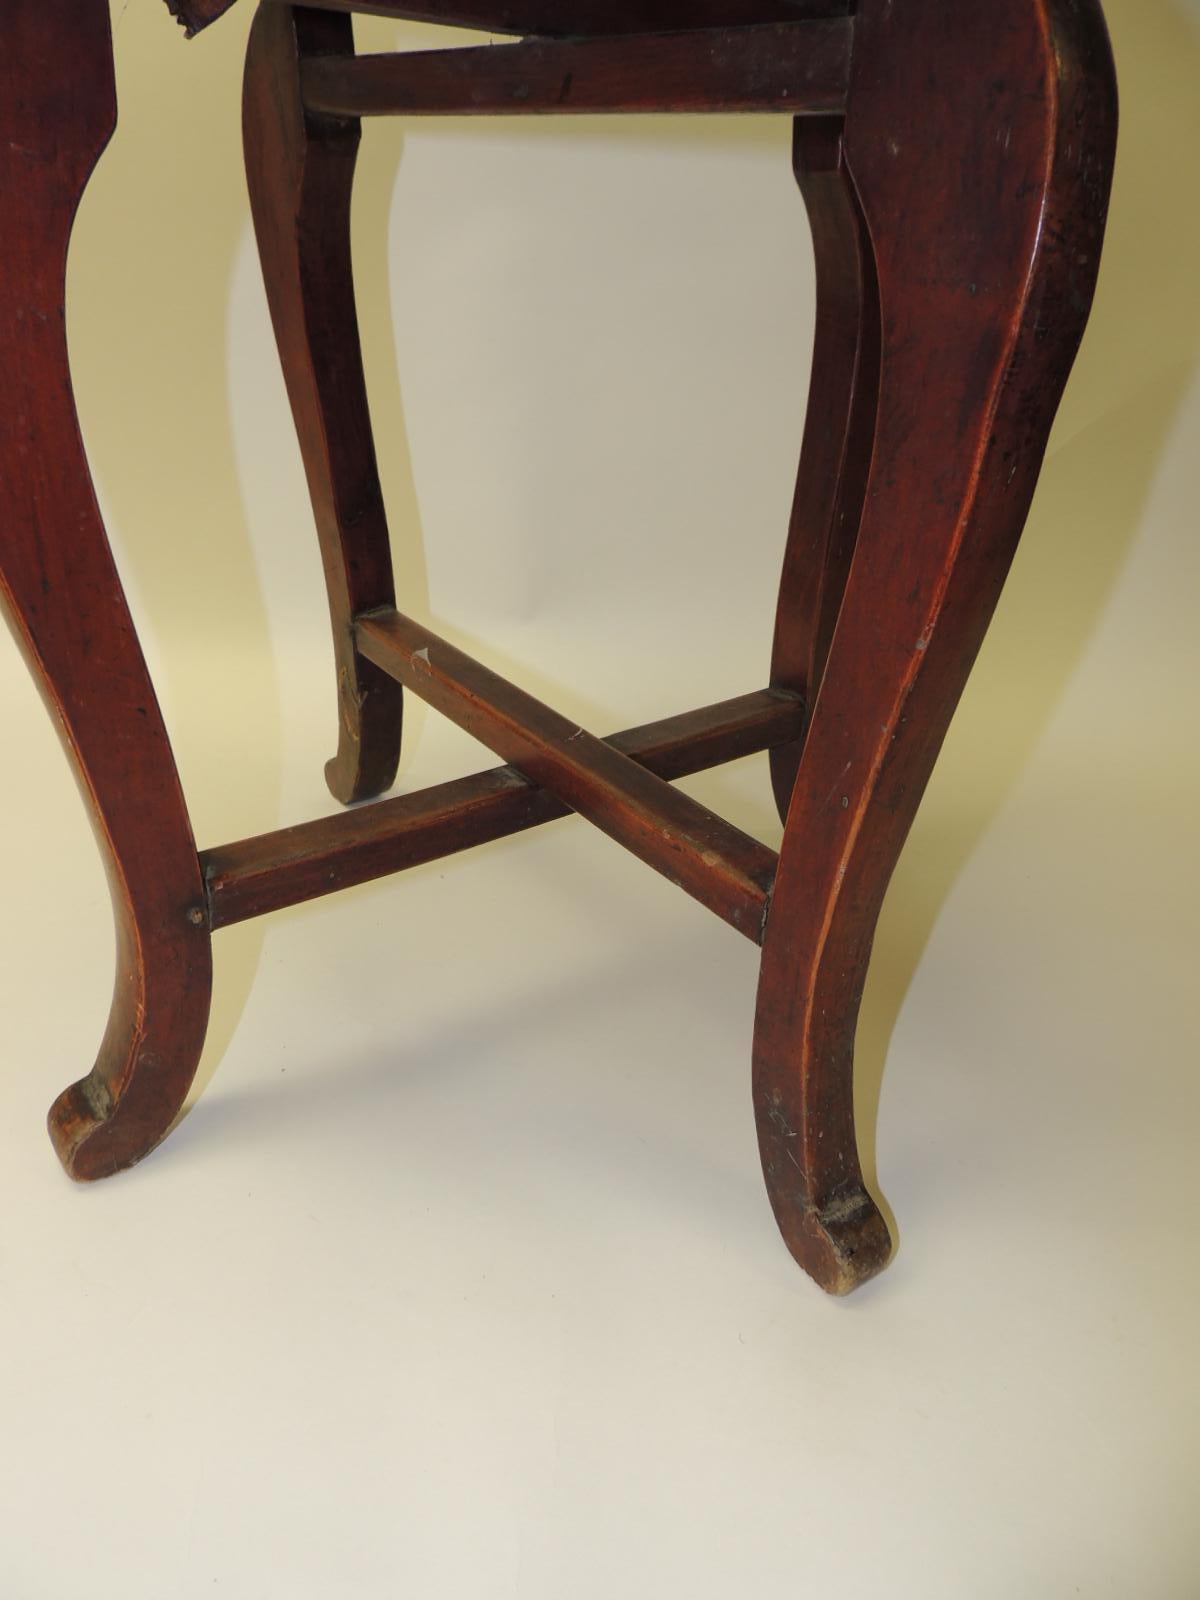 Chinese Export Round Asian Side Table or Stool with Carved Apron and Turned Wood Legs